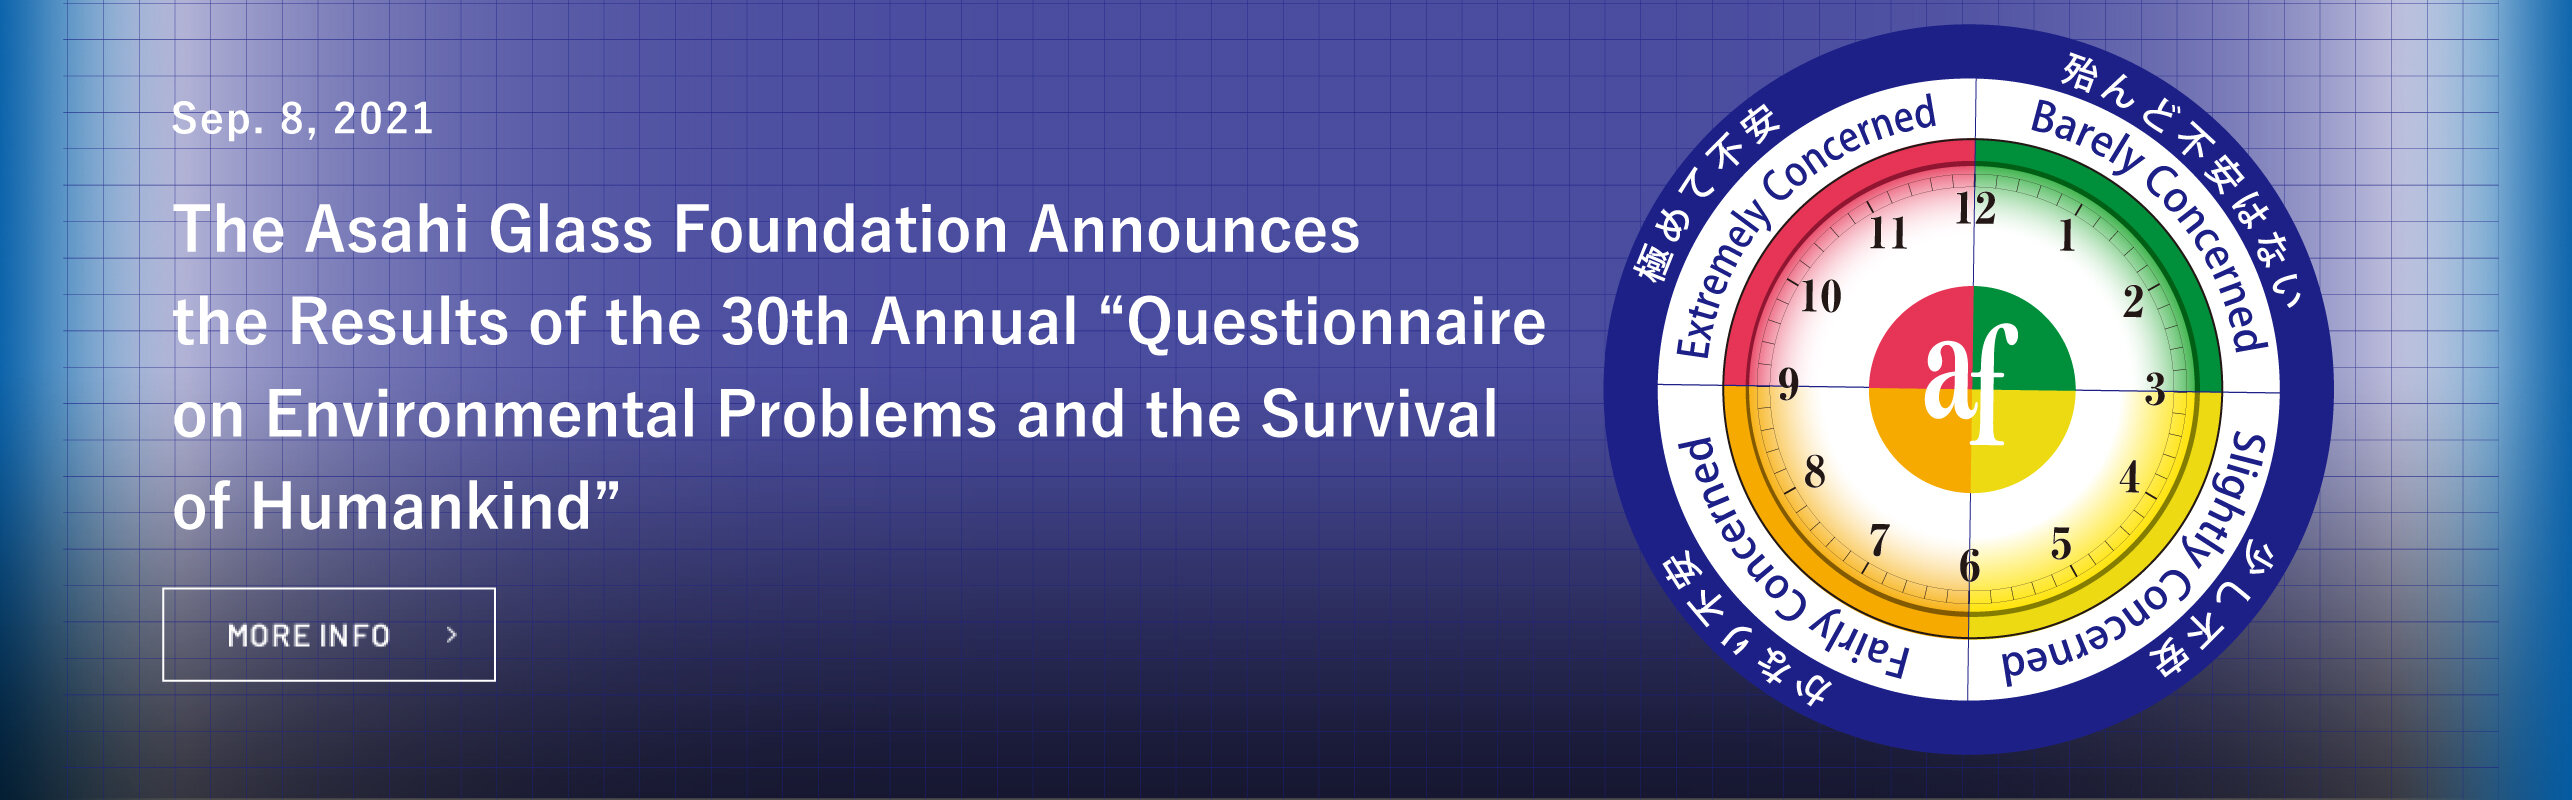 Results of the 30th annual "Questionnaire on Environmental Problems and the Survival of Humankind" announced